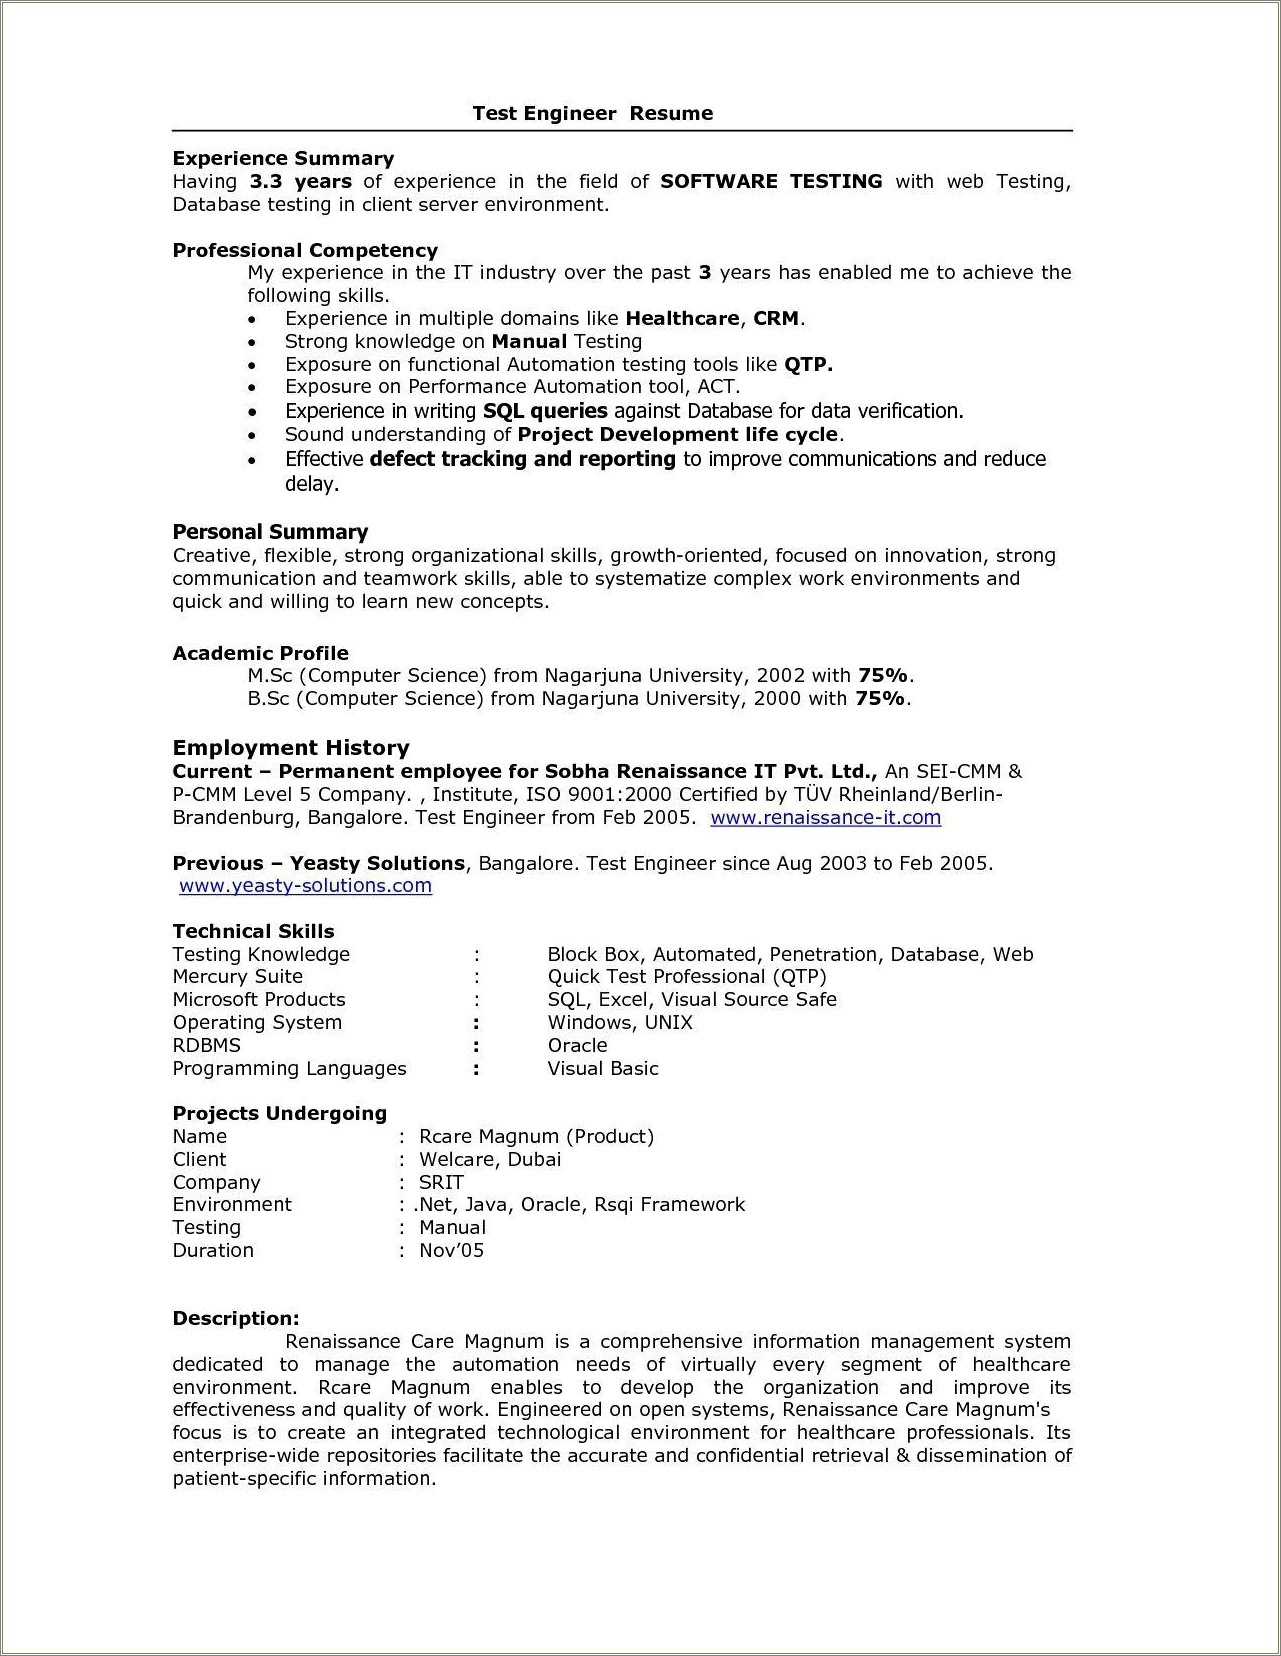 Oracle Developer Resume For 5 Years Experience